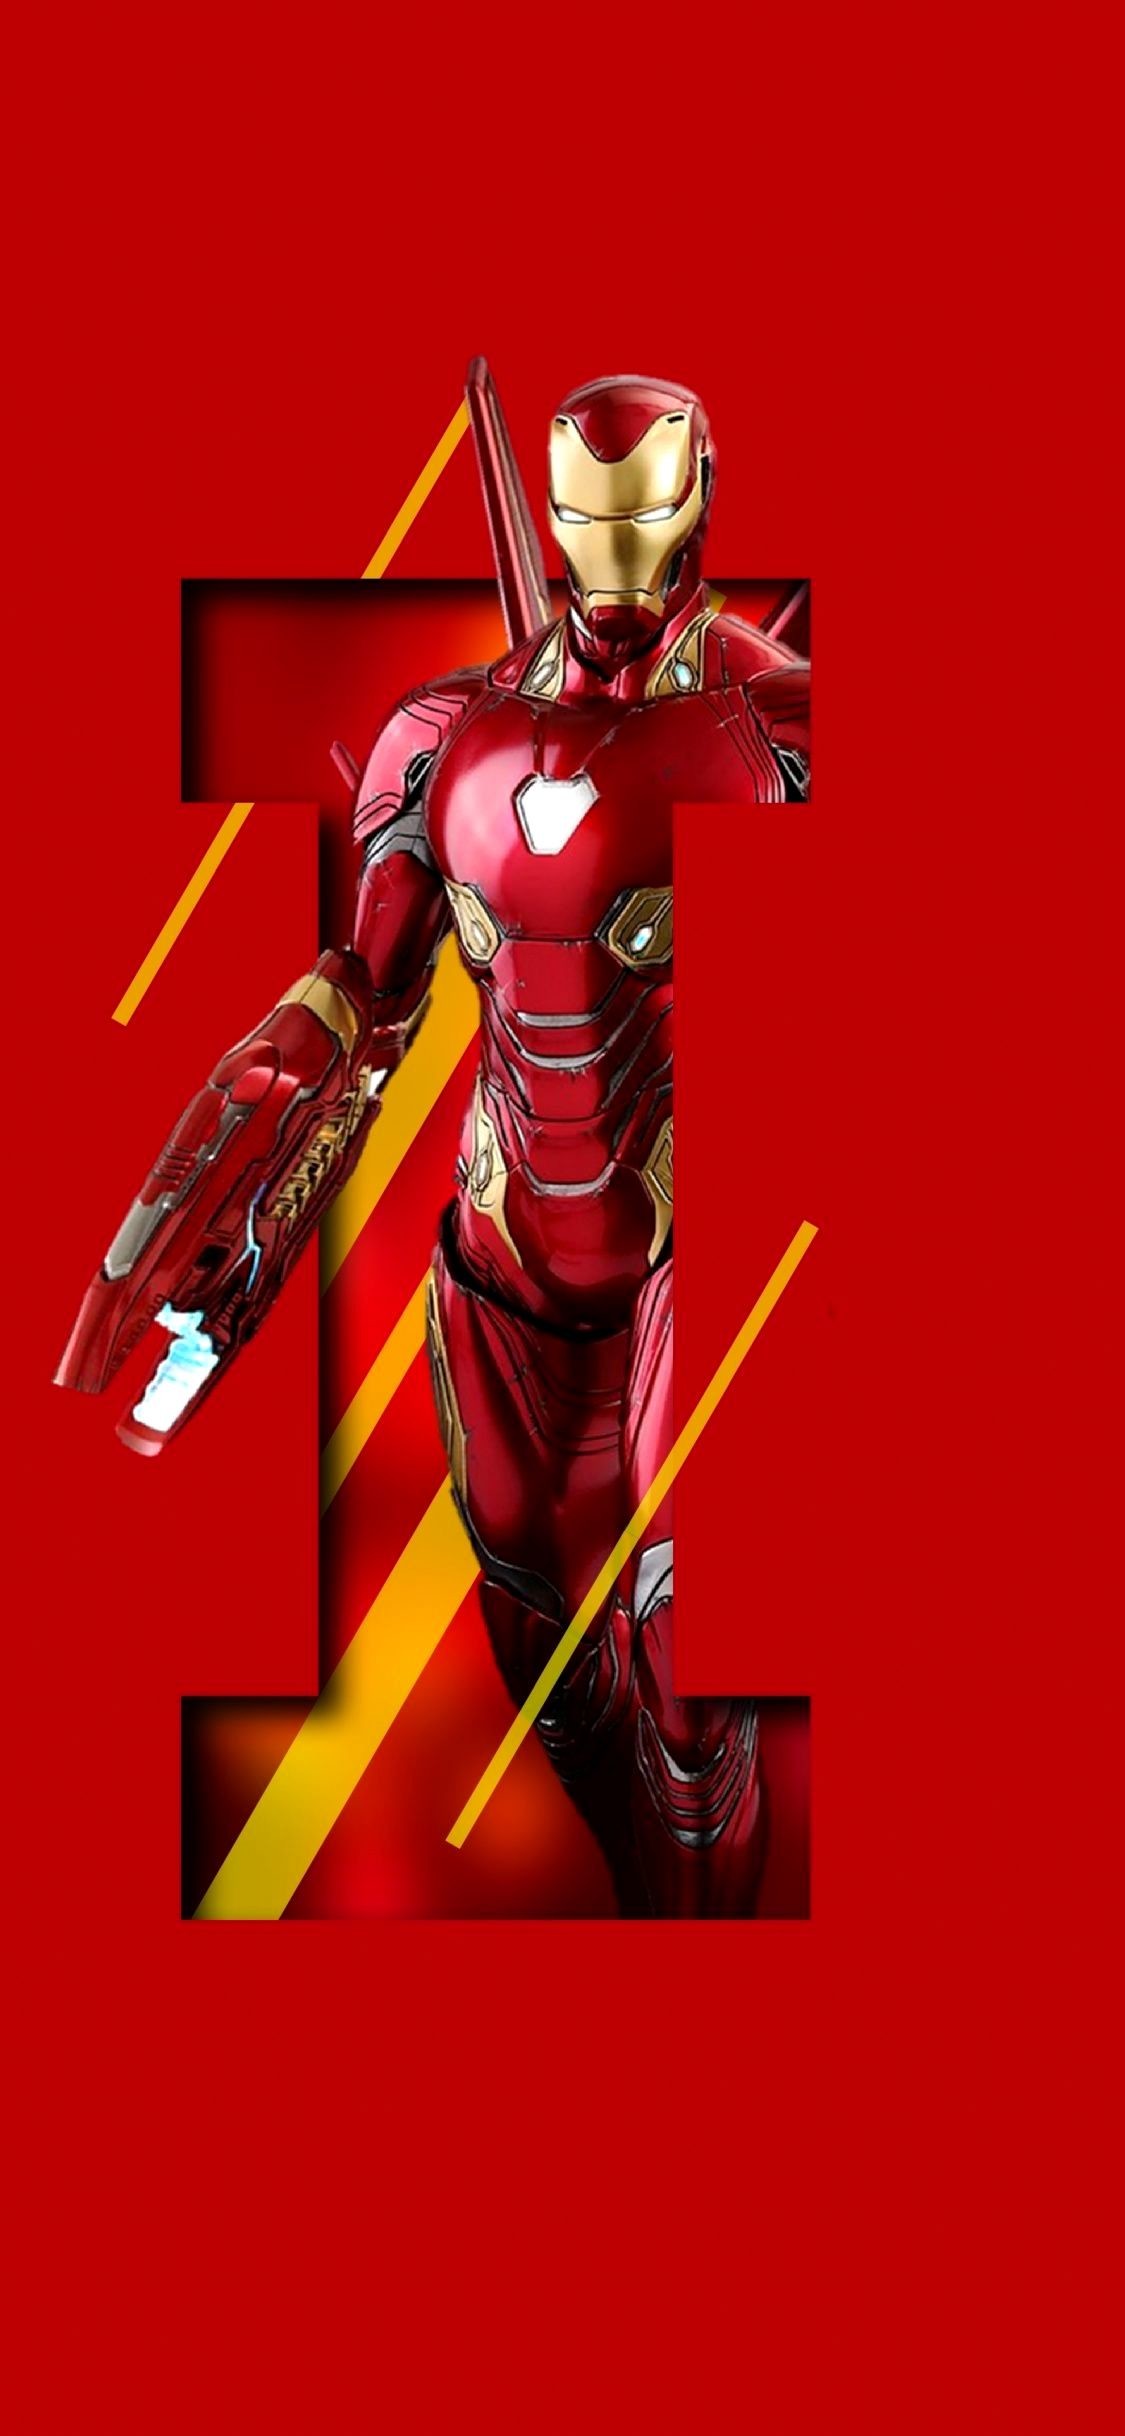 Iron Man Wallpaper IPhone (best Iron Man Wallpaper IPhone and image) on WallpaperChat